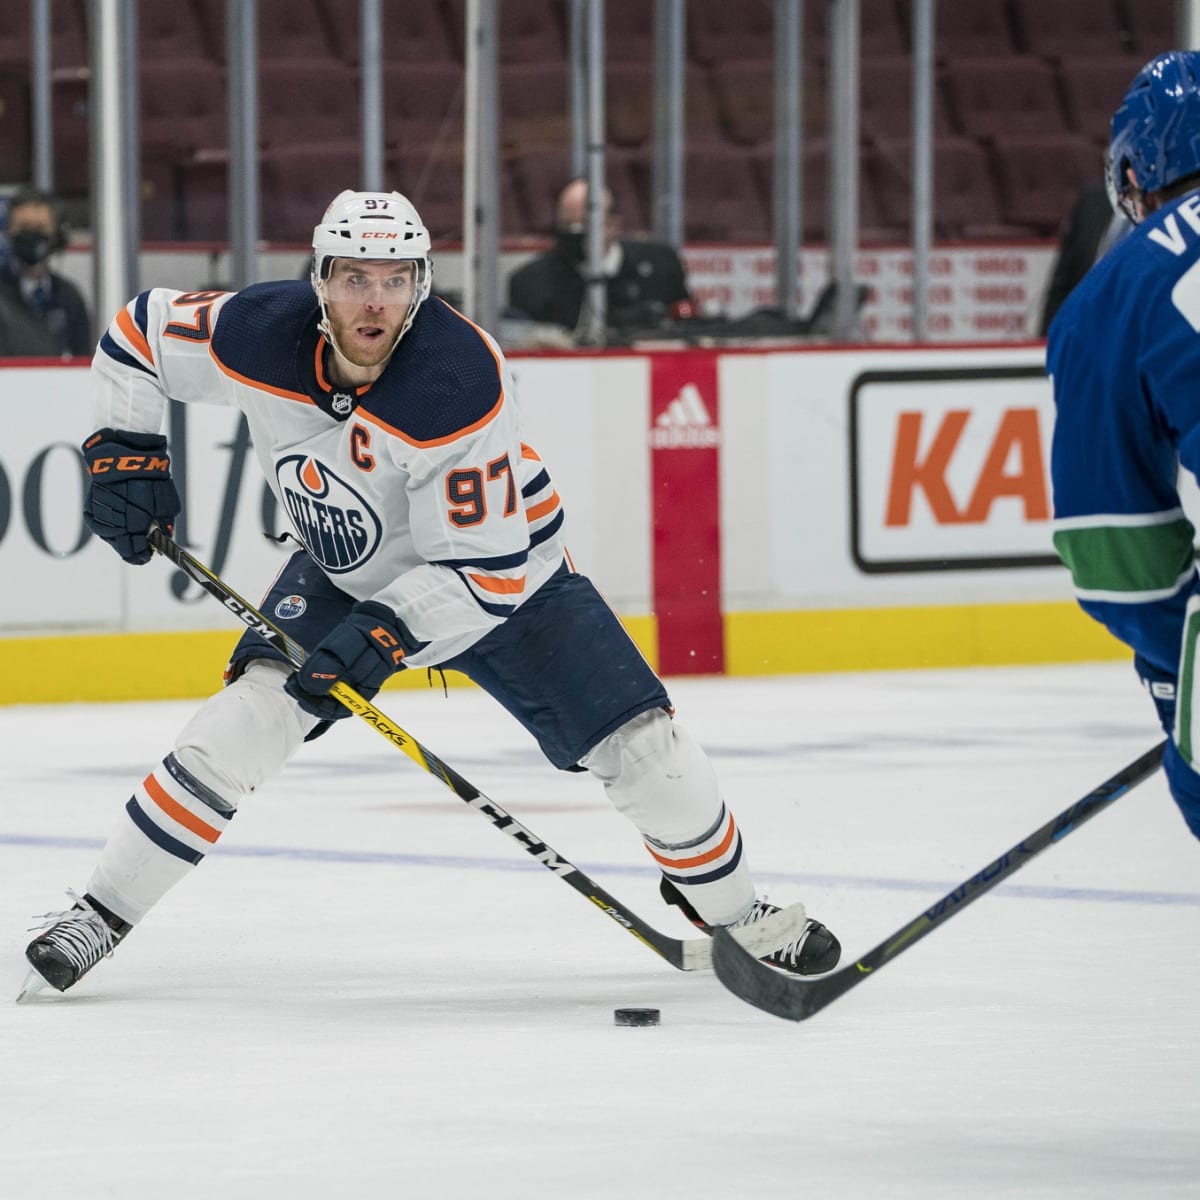 Connor McDavid Hits 100 Points in 53 Games. He's Not Done Yet